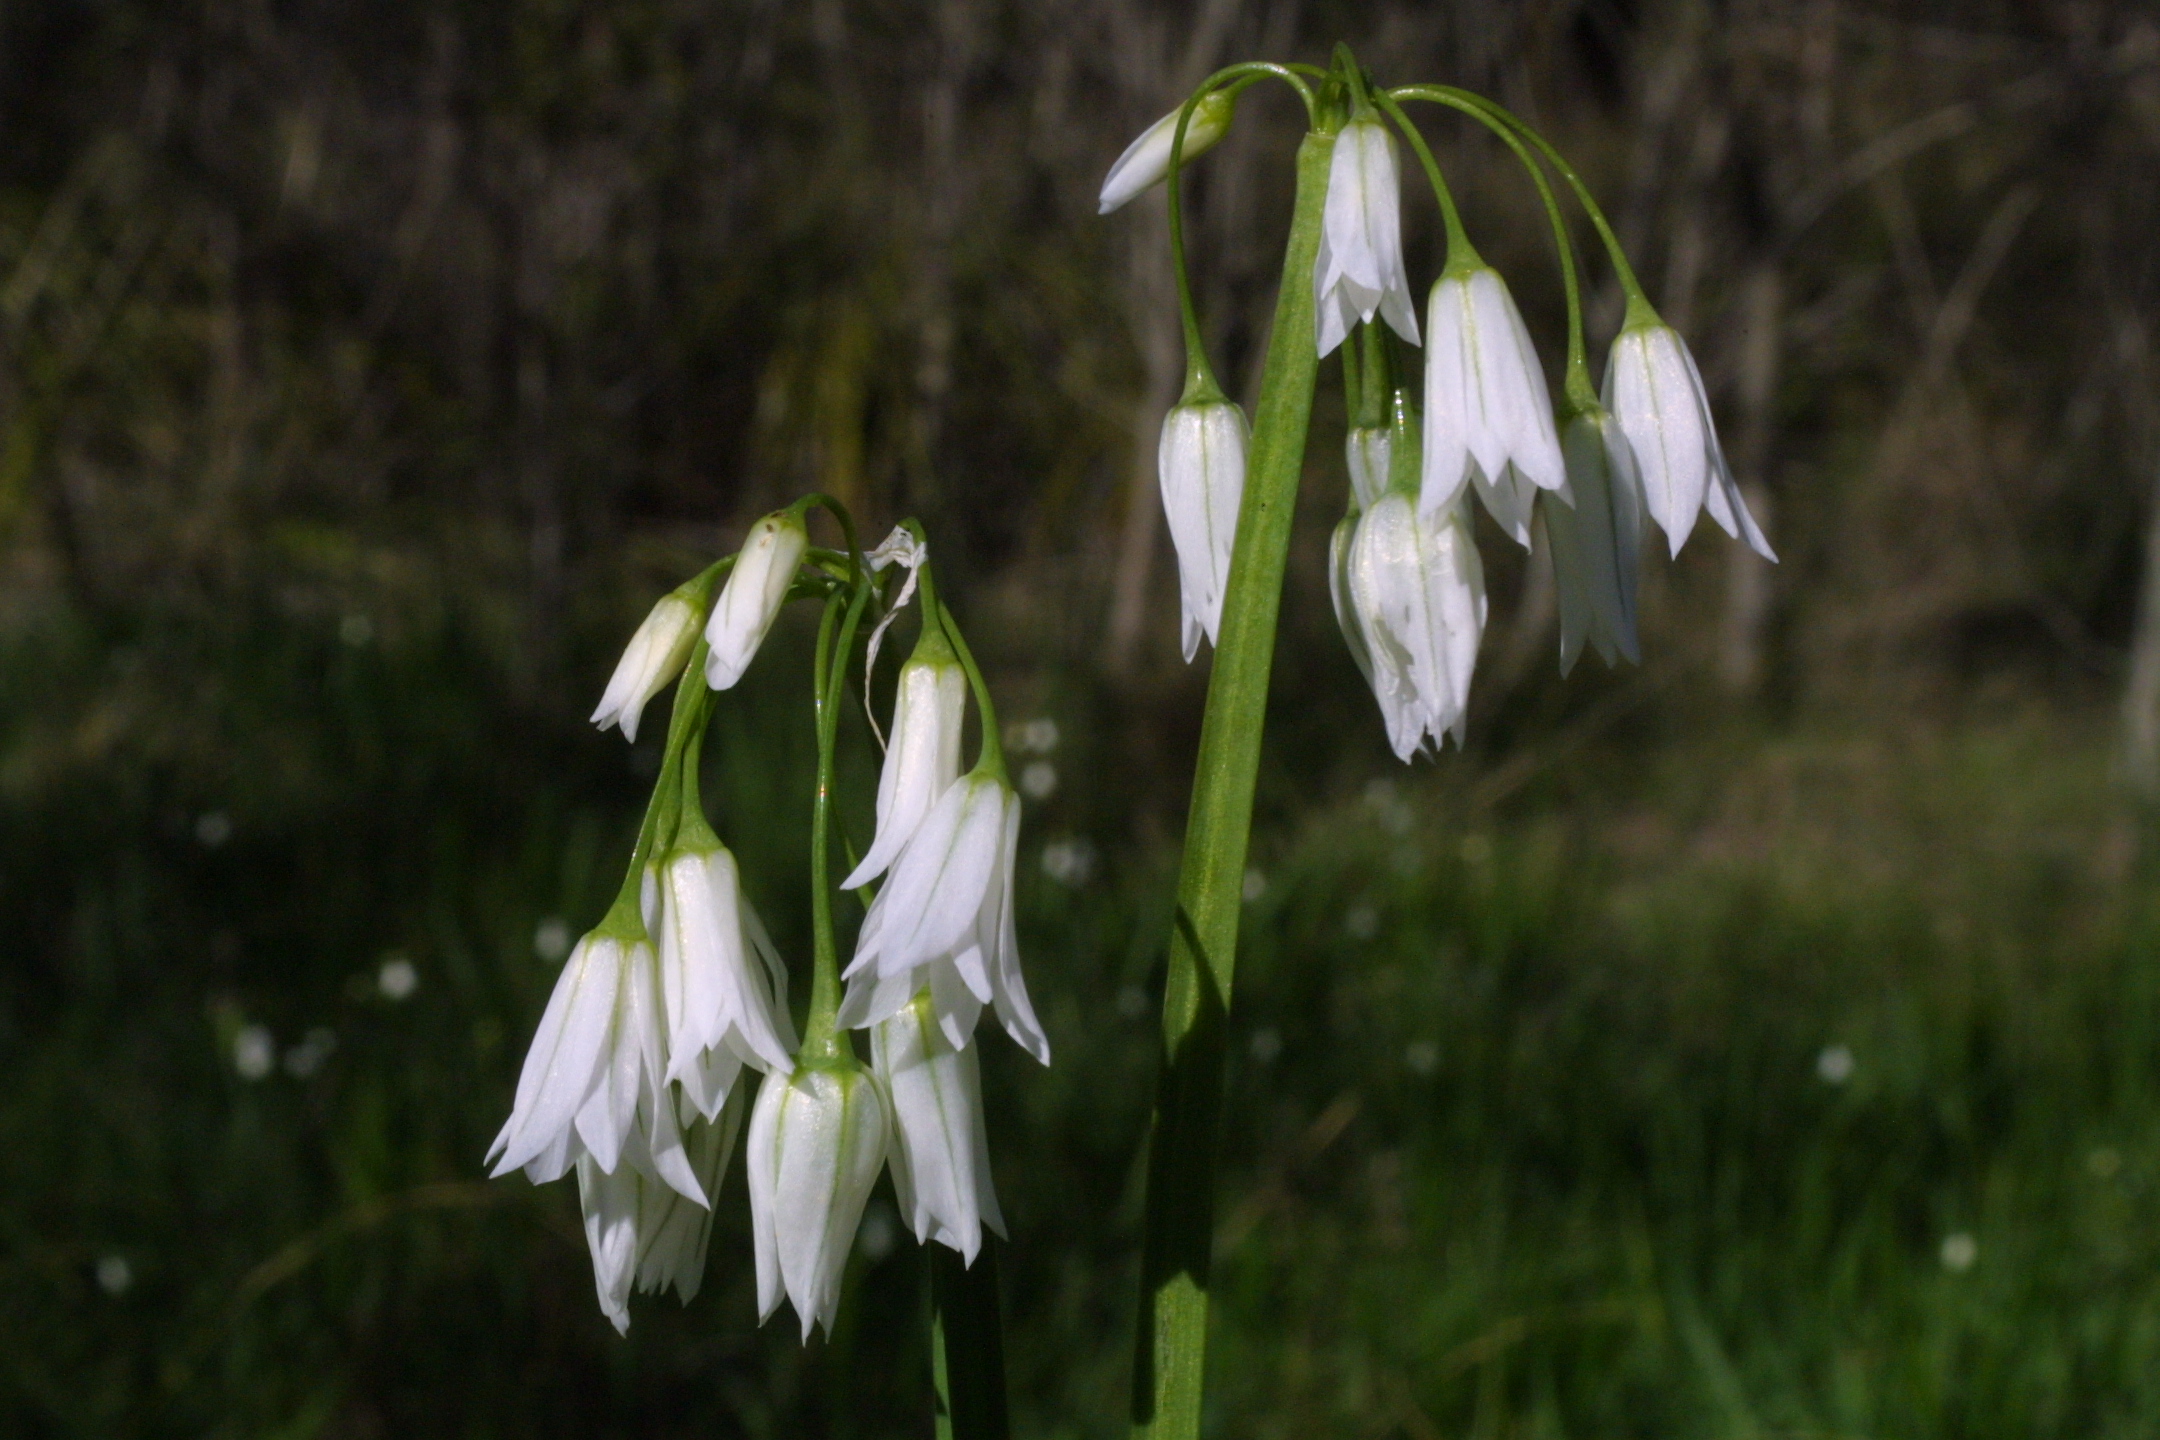 White bell shaped flowers